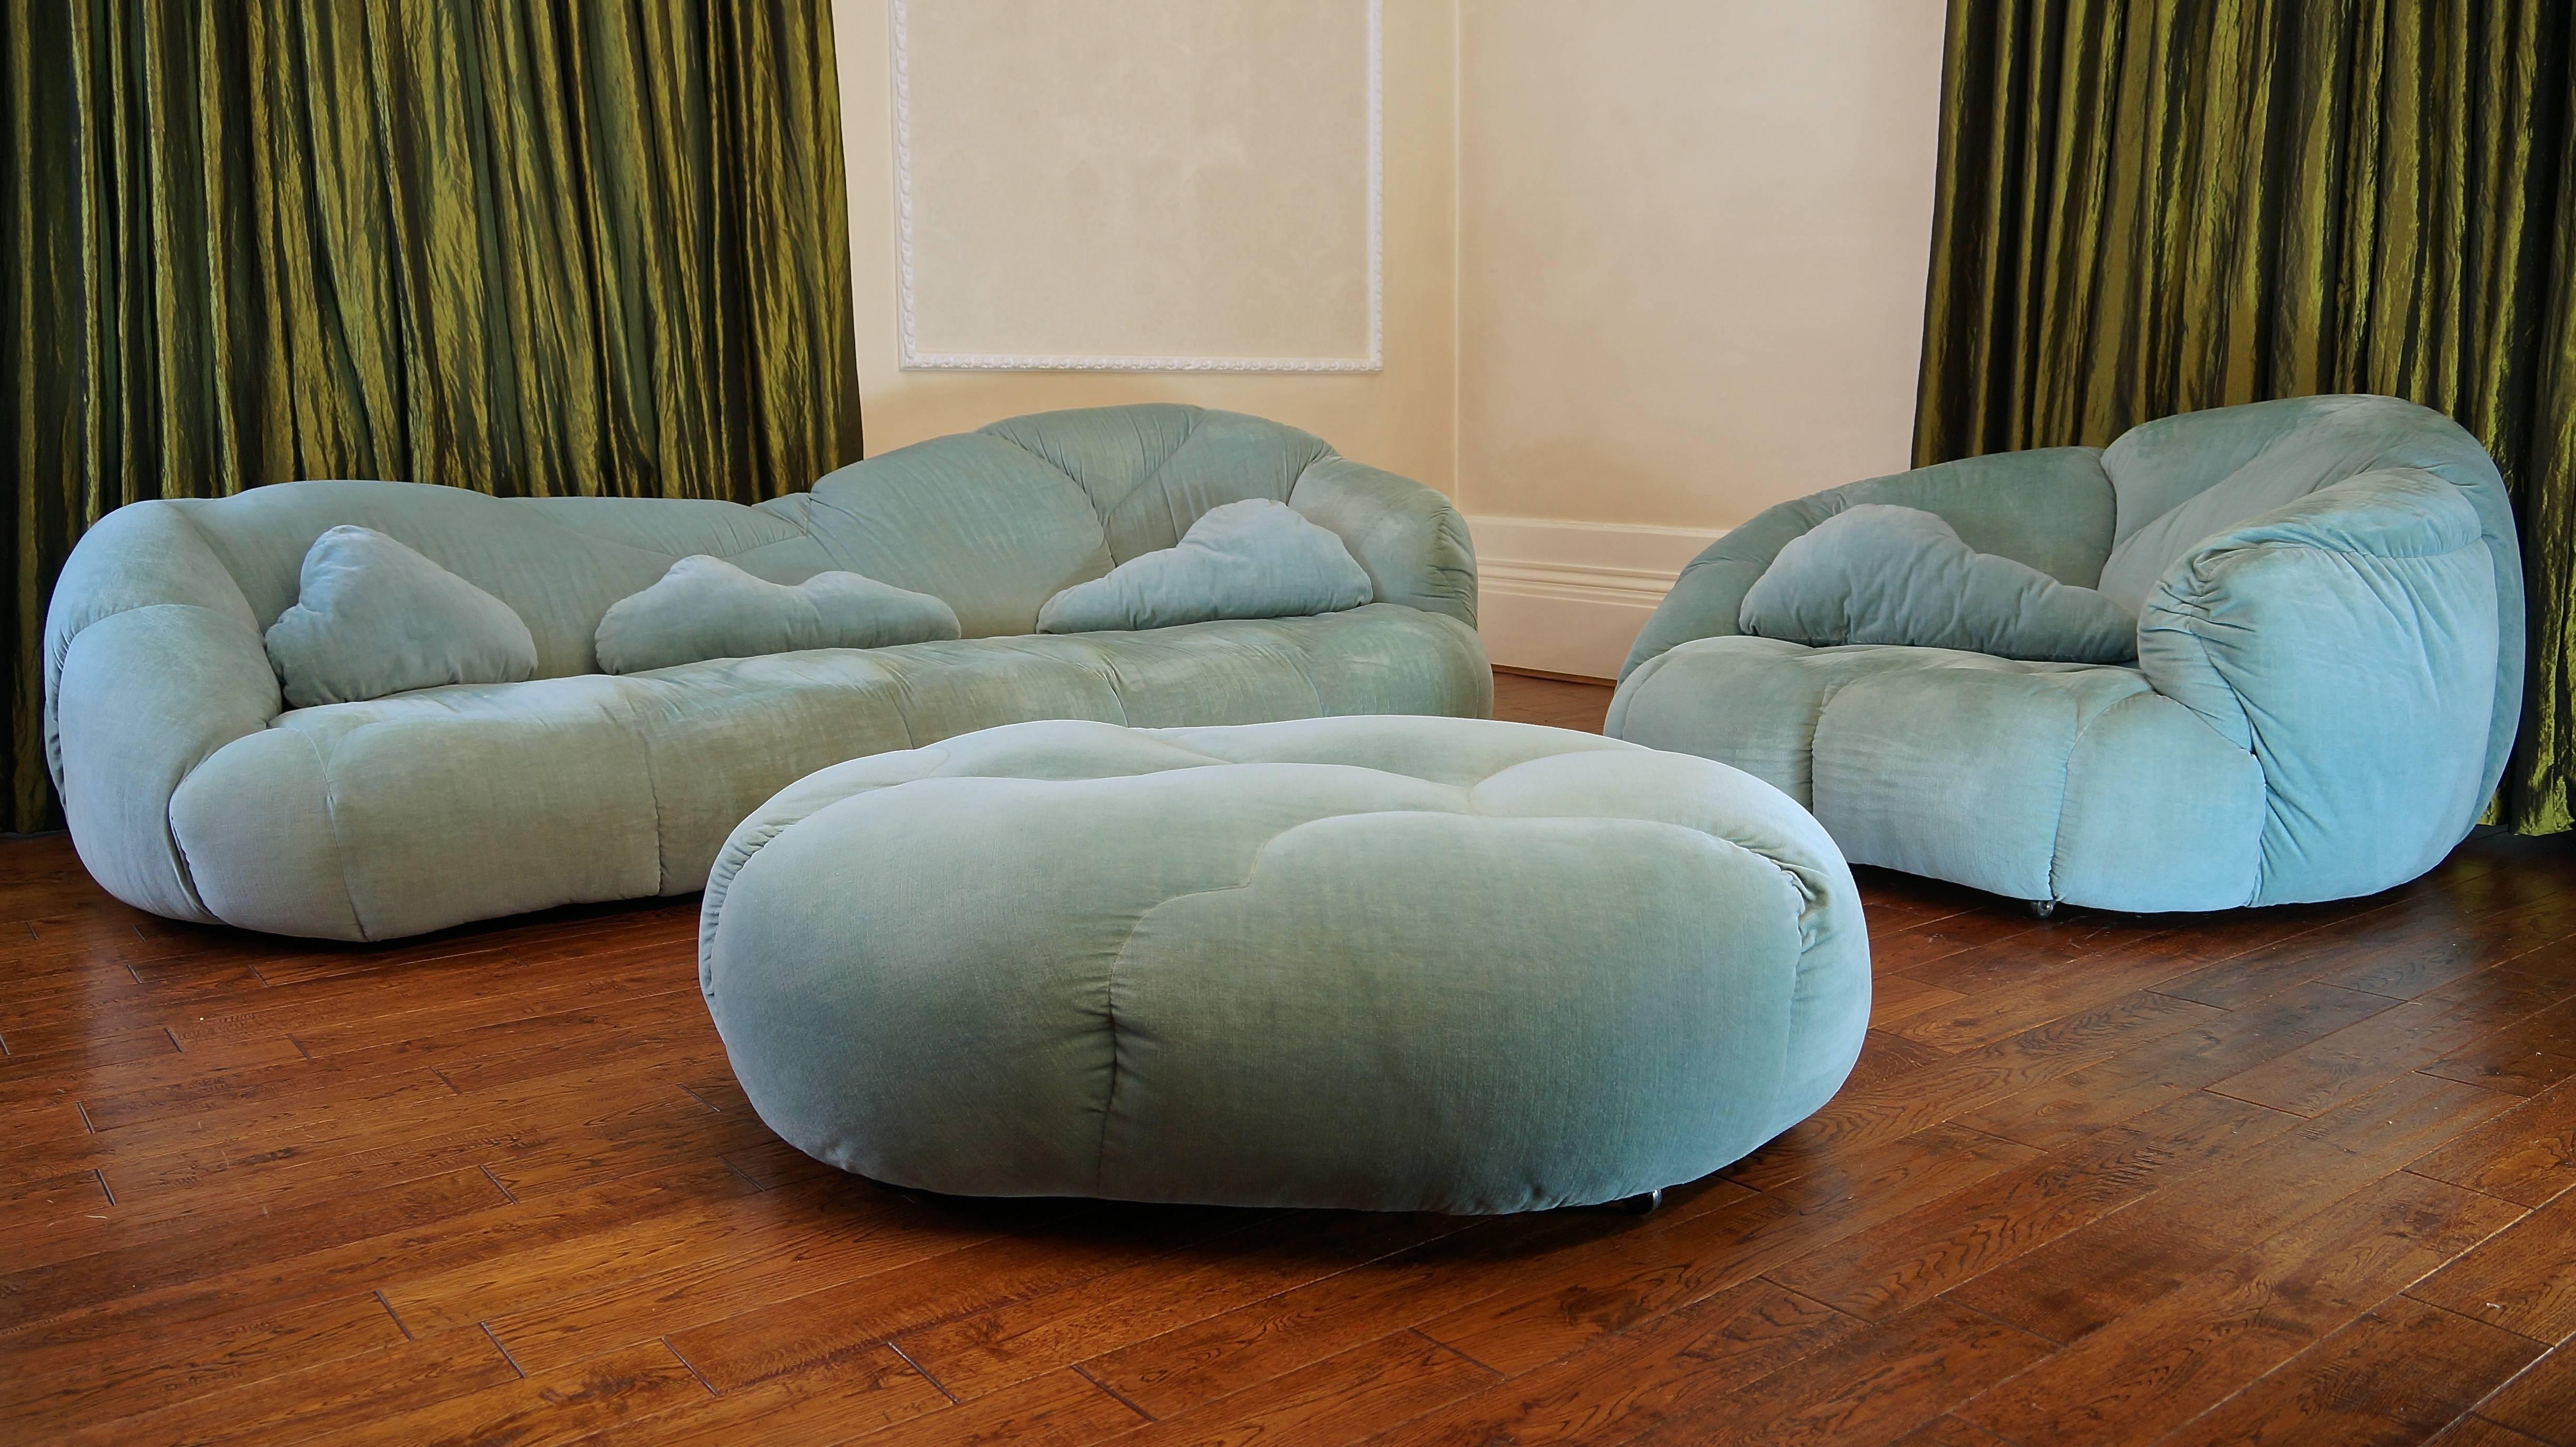 Incredibly rare cloud suite by HK Furniture comprising the stunning, large sofa/chaise longue and never seen before armchair and footstool/pouf and to top it all off the very rare, full compliment of cloud cushions!

Designed by Howard Keith,